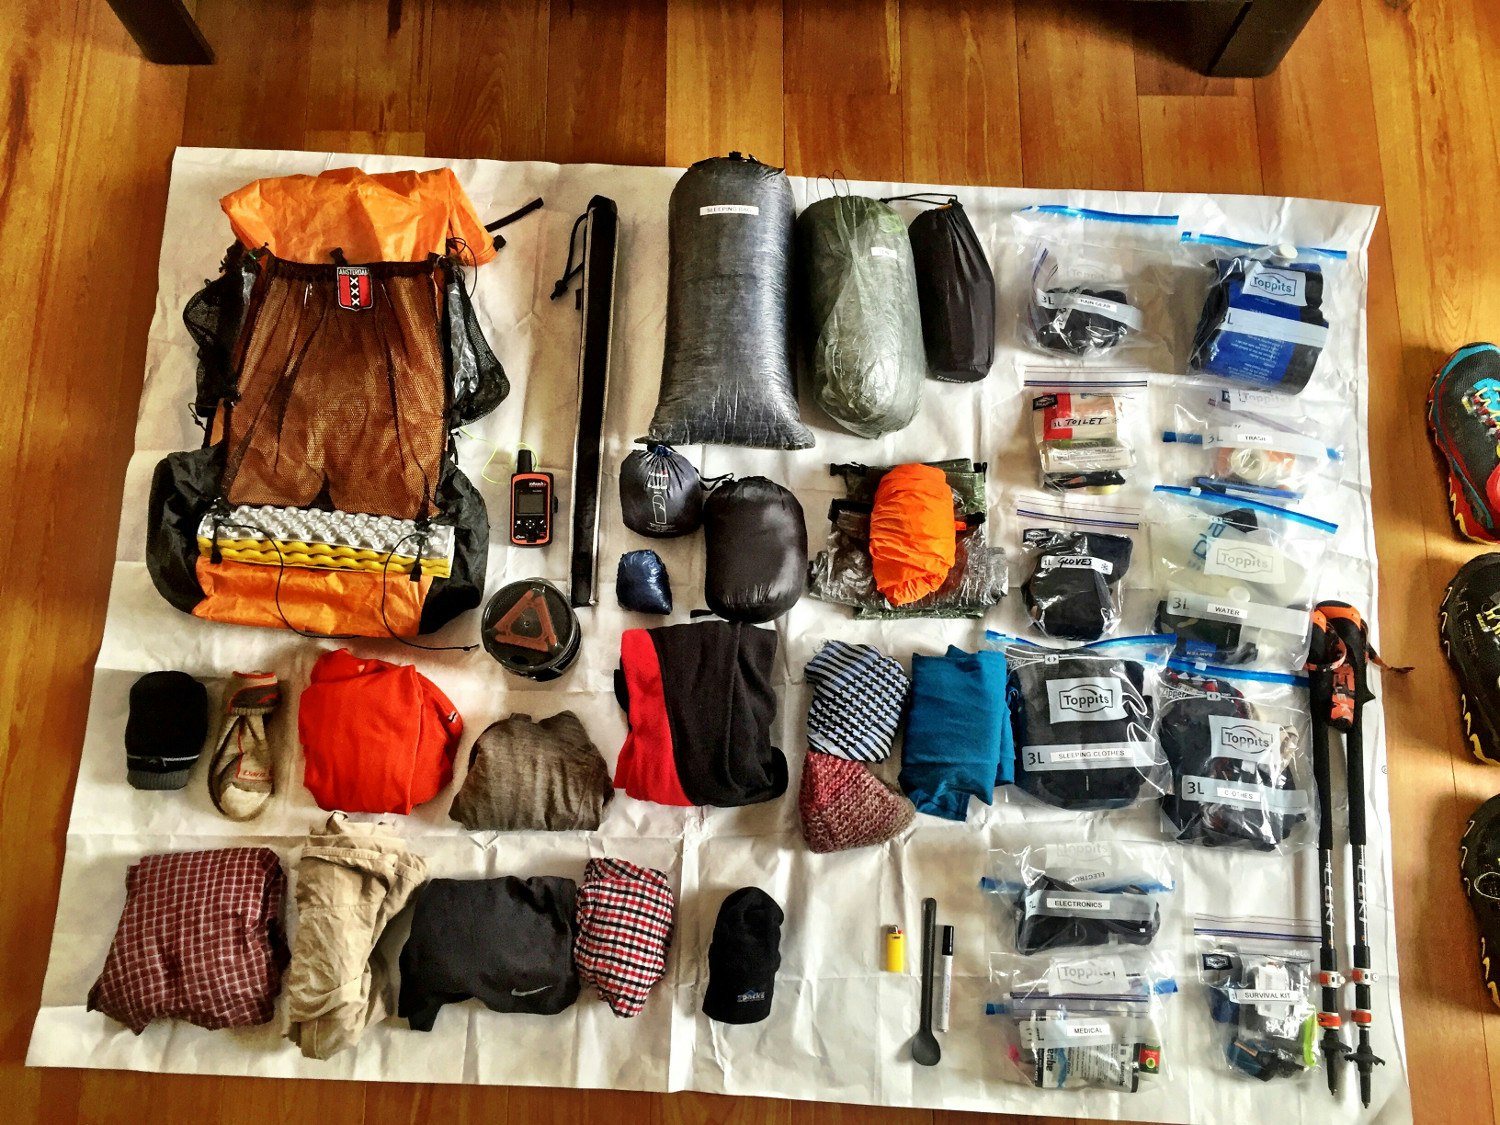 Tim's equipment for the six-month journey.